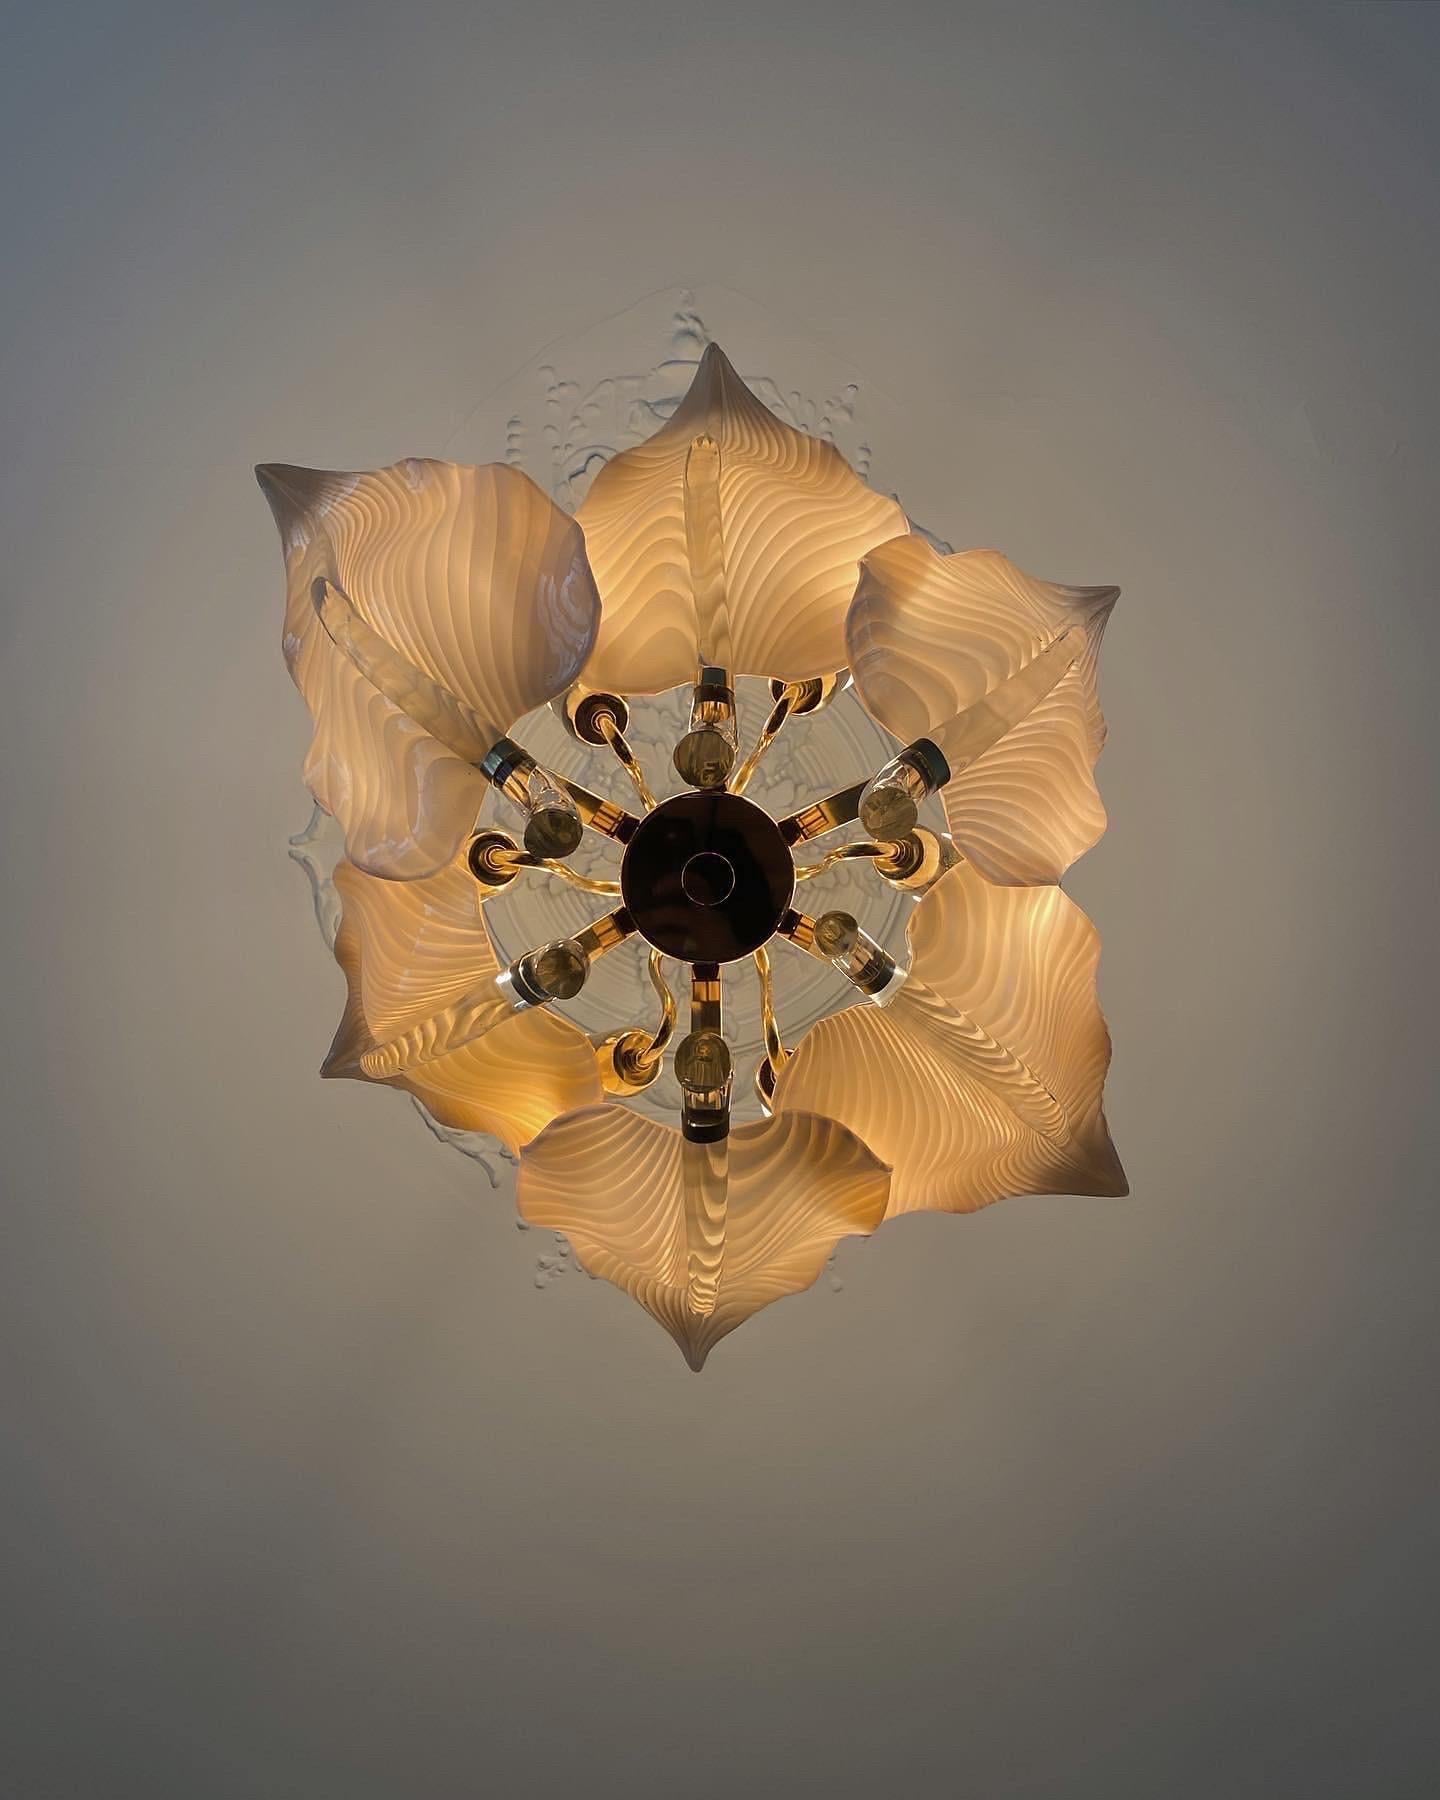 Mid-Century Modern Italian Murano flower like chandelier, designed by Franco Luce. Incredibly well made chandelier in Brass and Murano glass gives a warm and elegant light to any room. Disassembles for easy shipping.